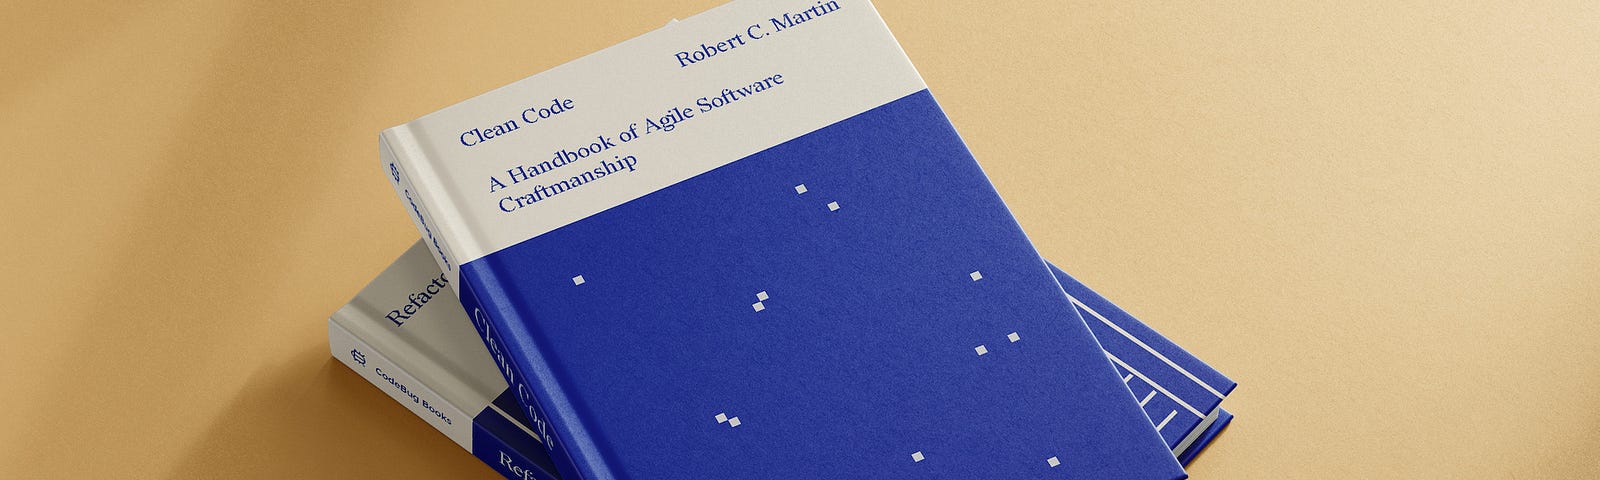 Mockup of two books, one on top of the other. On the top is ‘Clean Code’ by Robert C. Martin. It showcases the cover, redesigned by María Simó, on cream and electric blue tones and some dots resembling pixels or constellations.